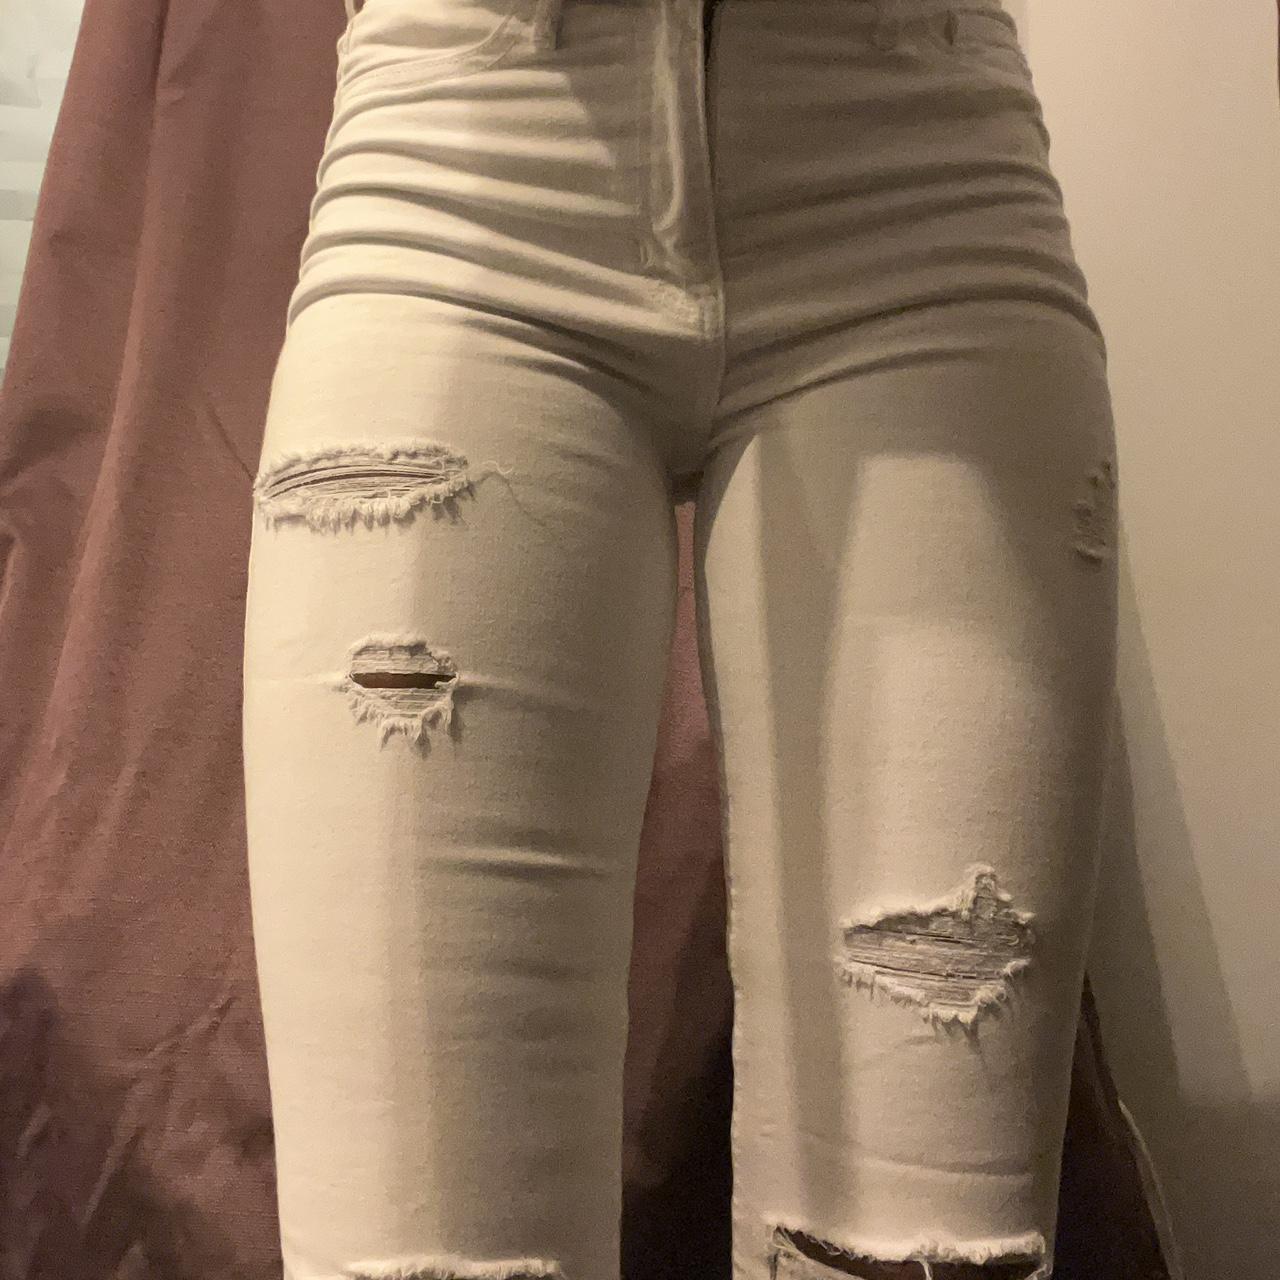 Hollister White Mid Rise Skinny Jeans ❤️🚨FREE - Depop